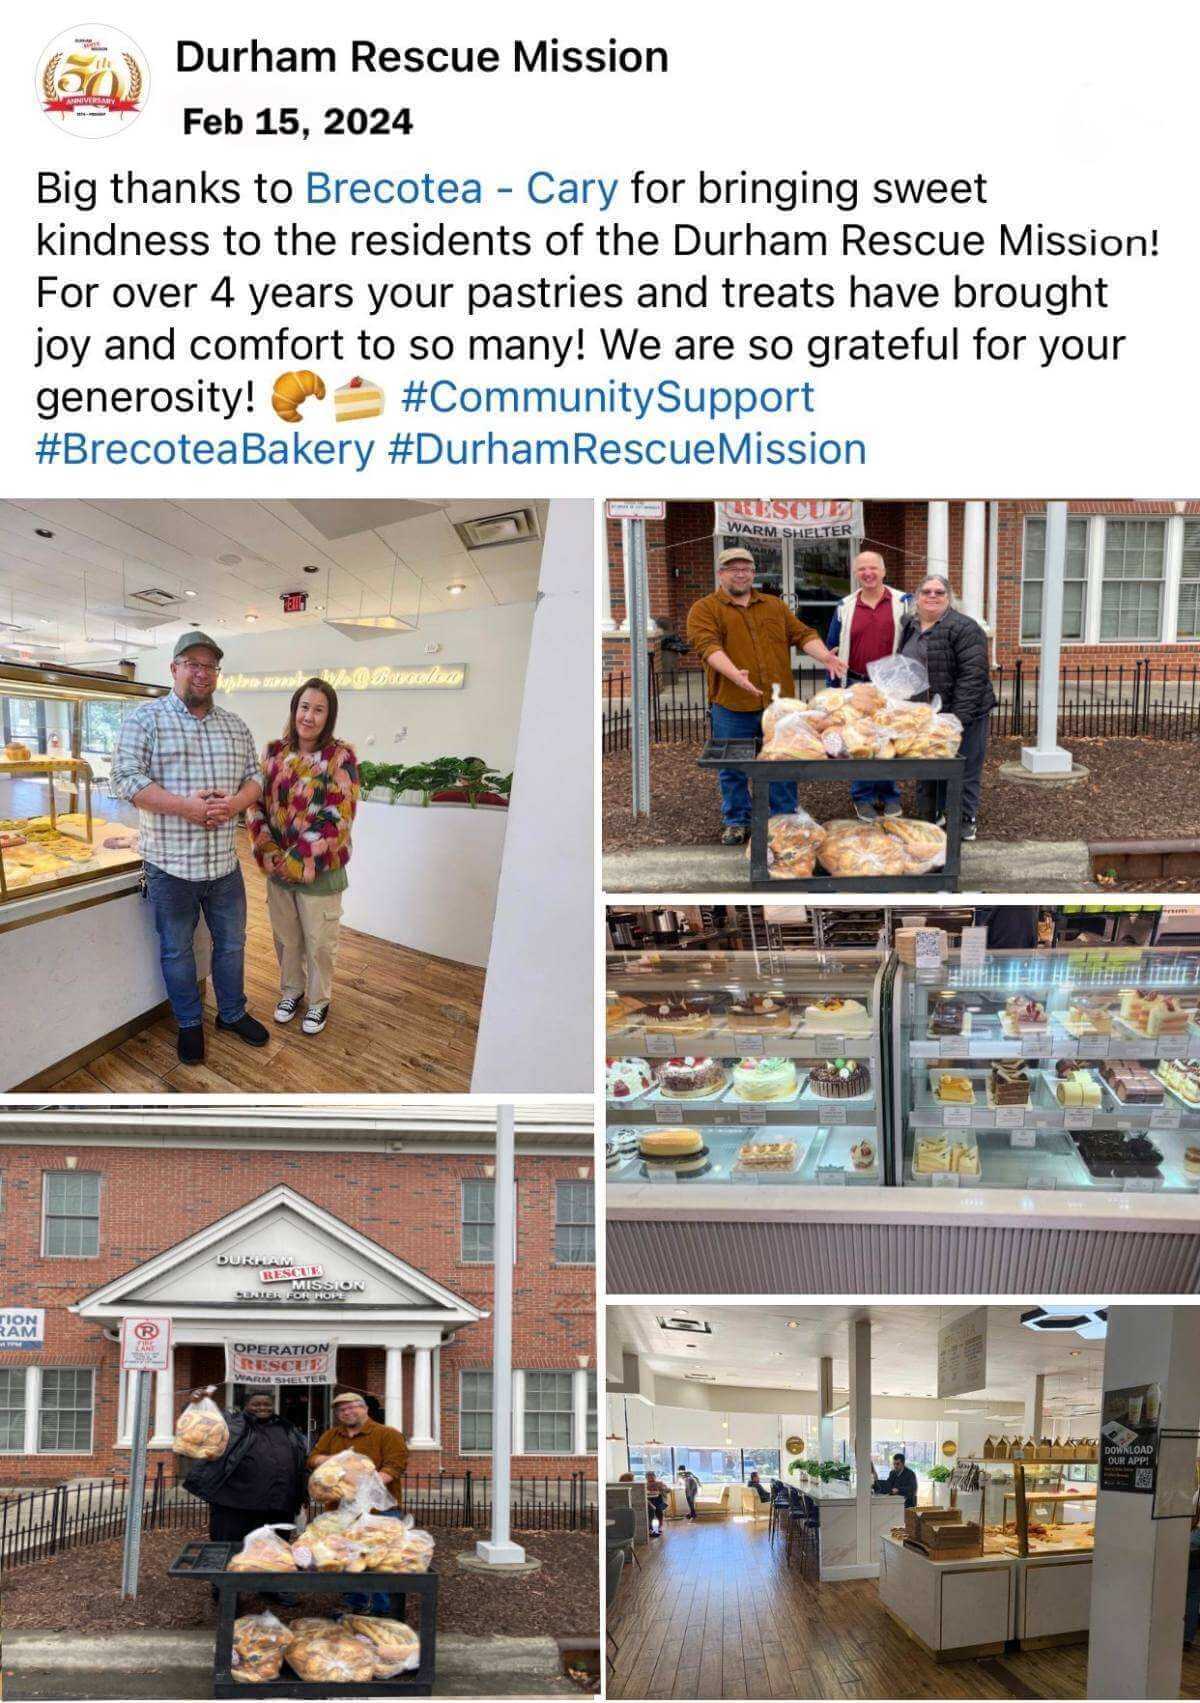 Cary Brecotea Community Support for the Durham Rescue Mission